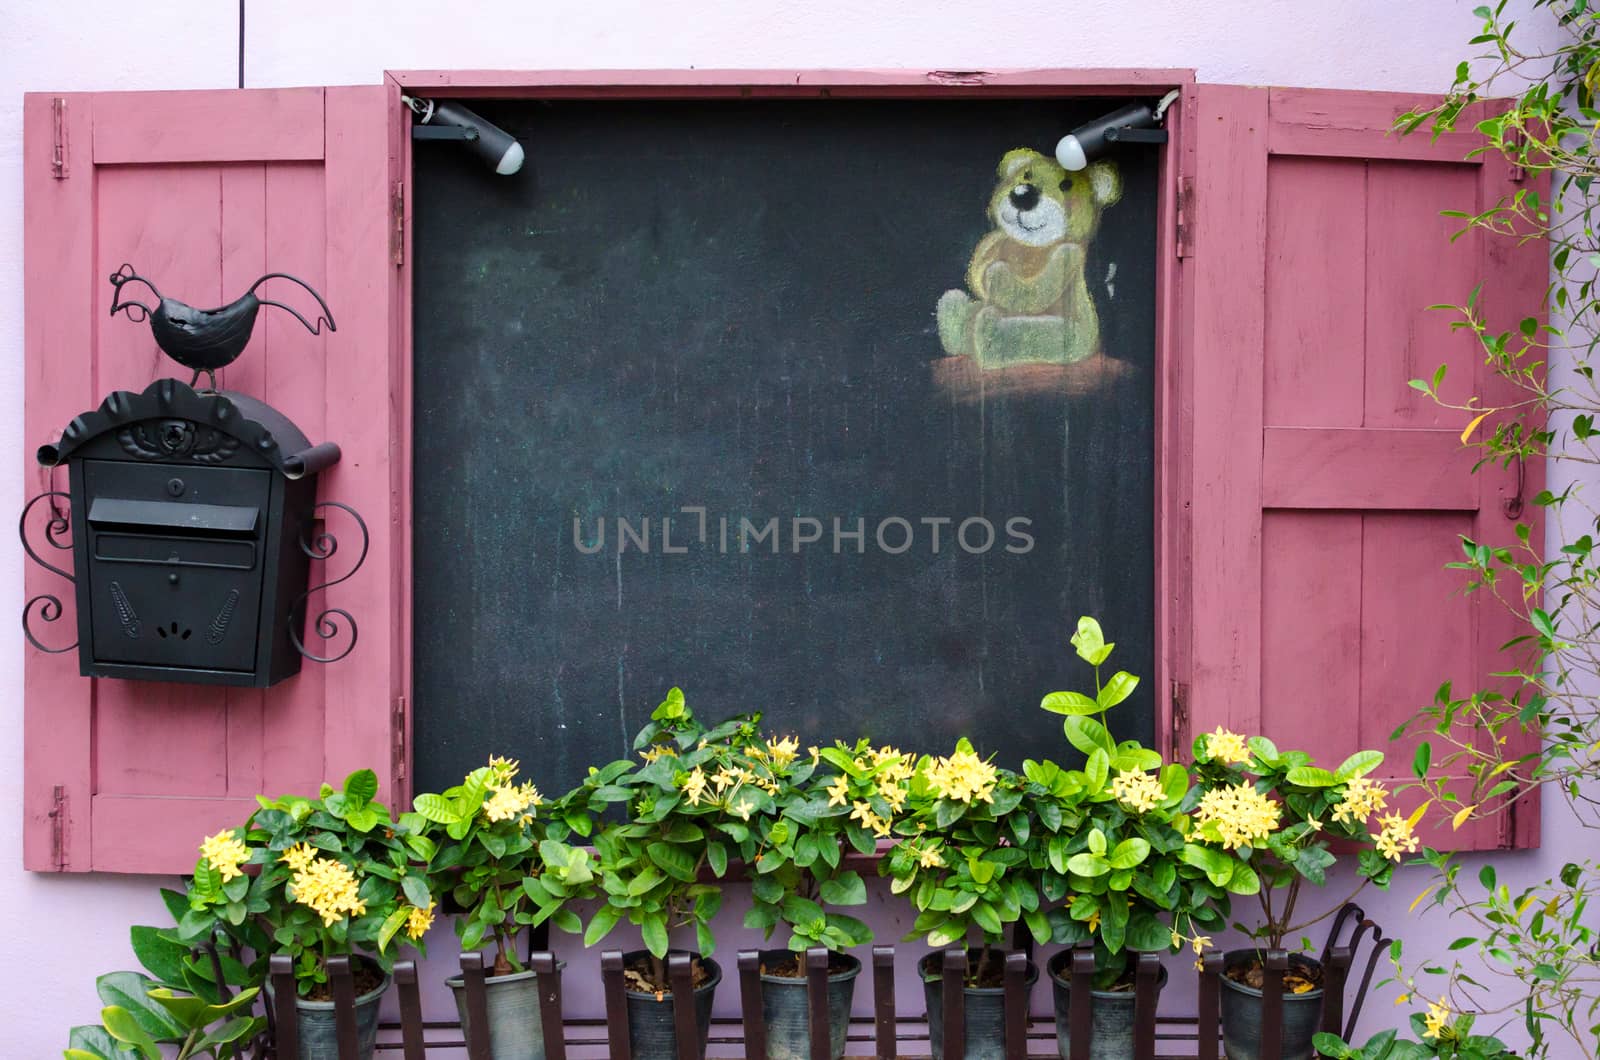 Yellow flower in plant pots growing on pink windows and blackboa by nopparats